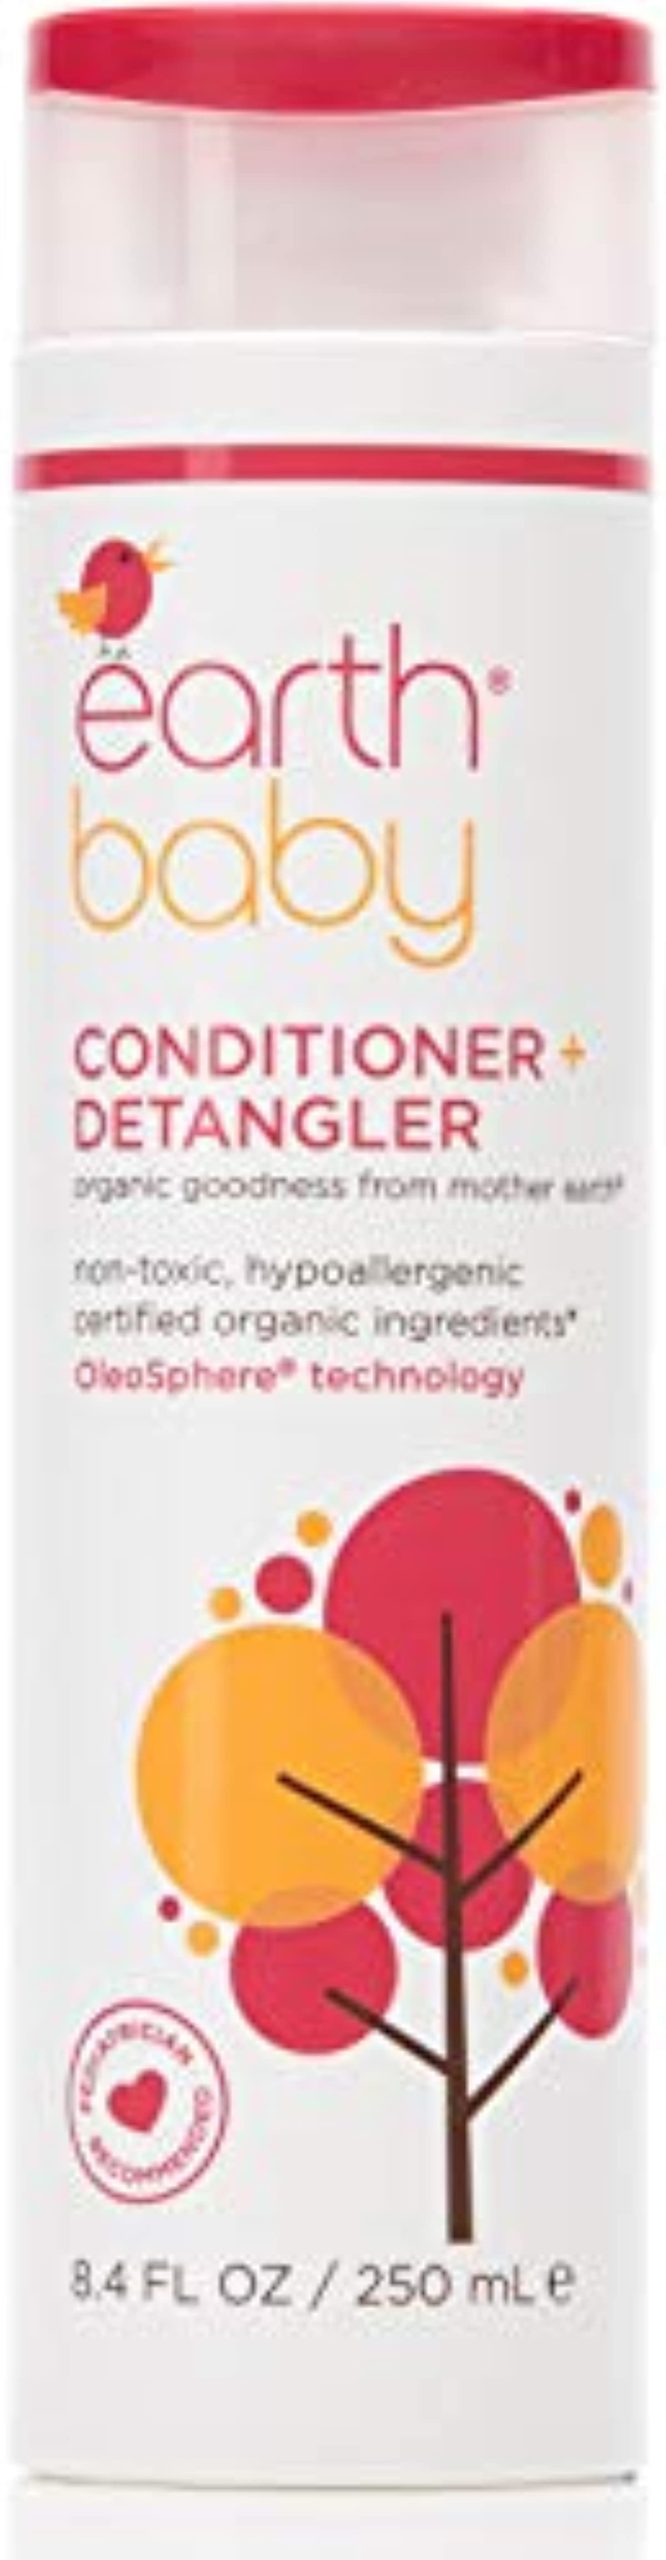 Earth Baby Conditioner + Detangler, Hypoallergenic for Sensitive Skin, Natural and Organic, for Babies Toddlers and Kids, 8.4 Fl Oz